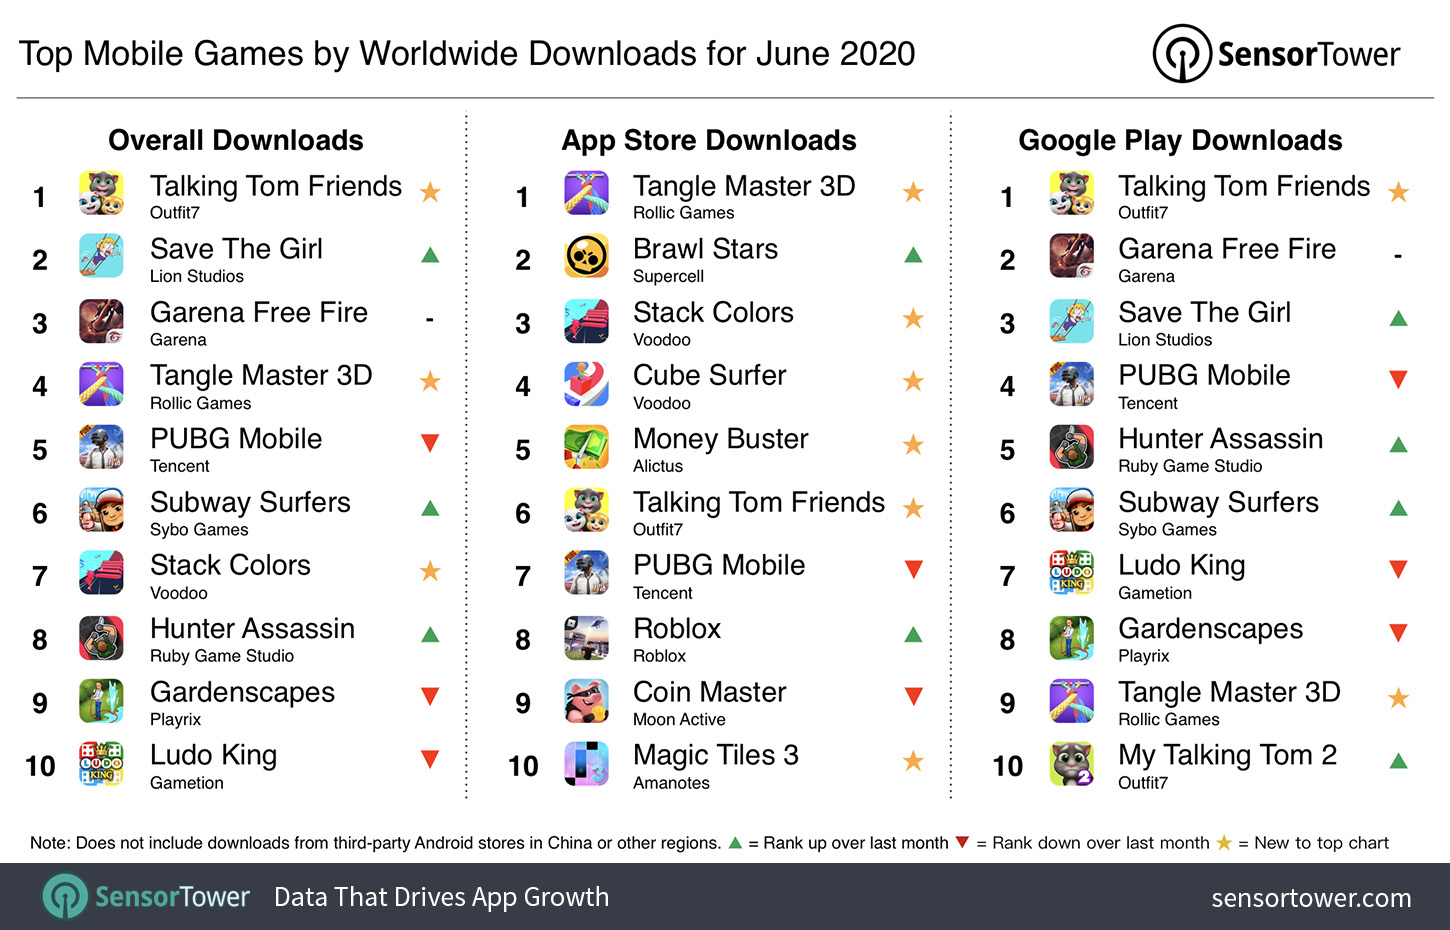 Top mobile games Worldwide for June 2020 by Downloads